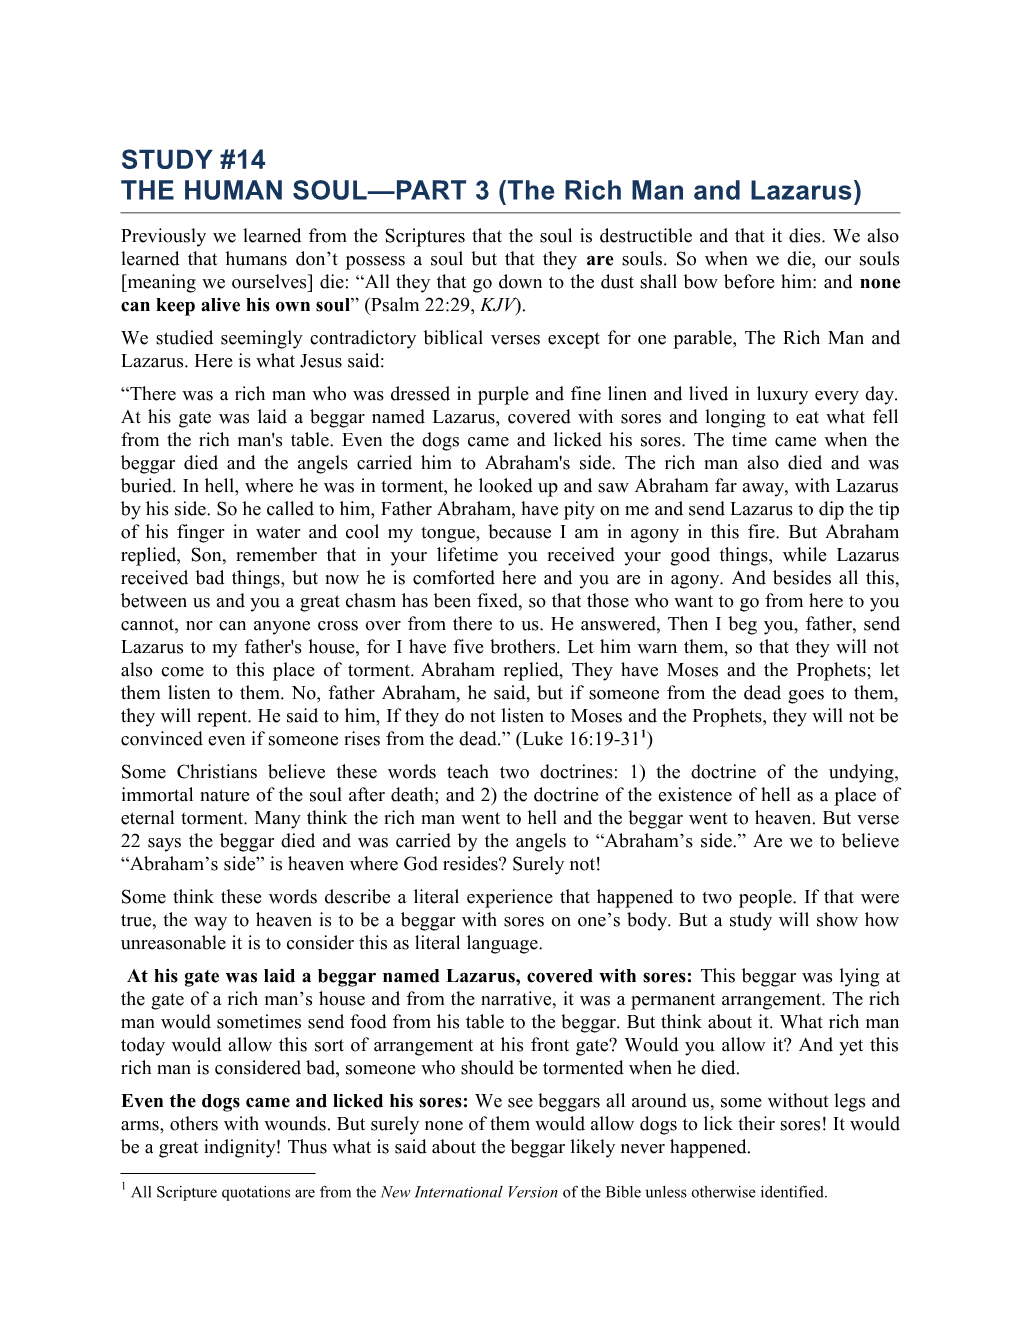 STUDY#14 the HUMAN SOUL PART 3 (The Rich Man and Lazarus)